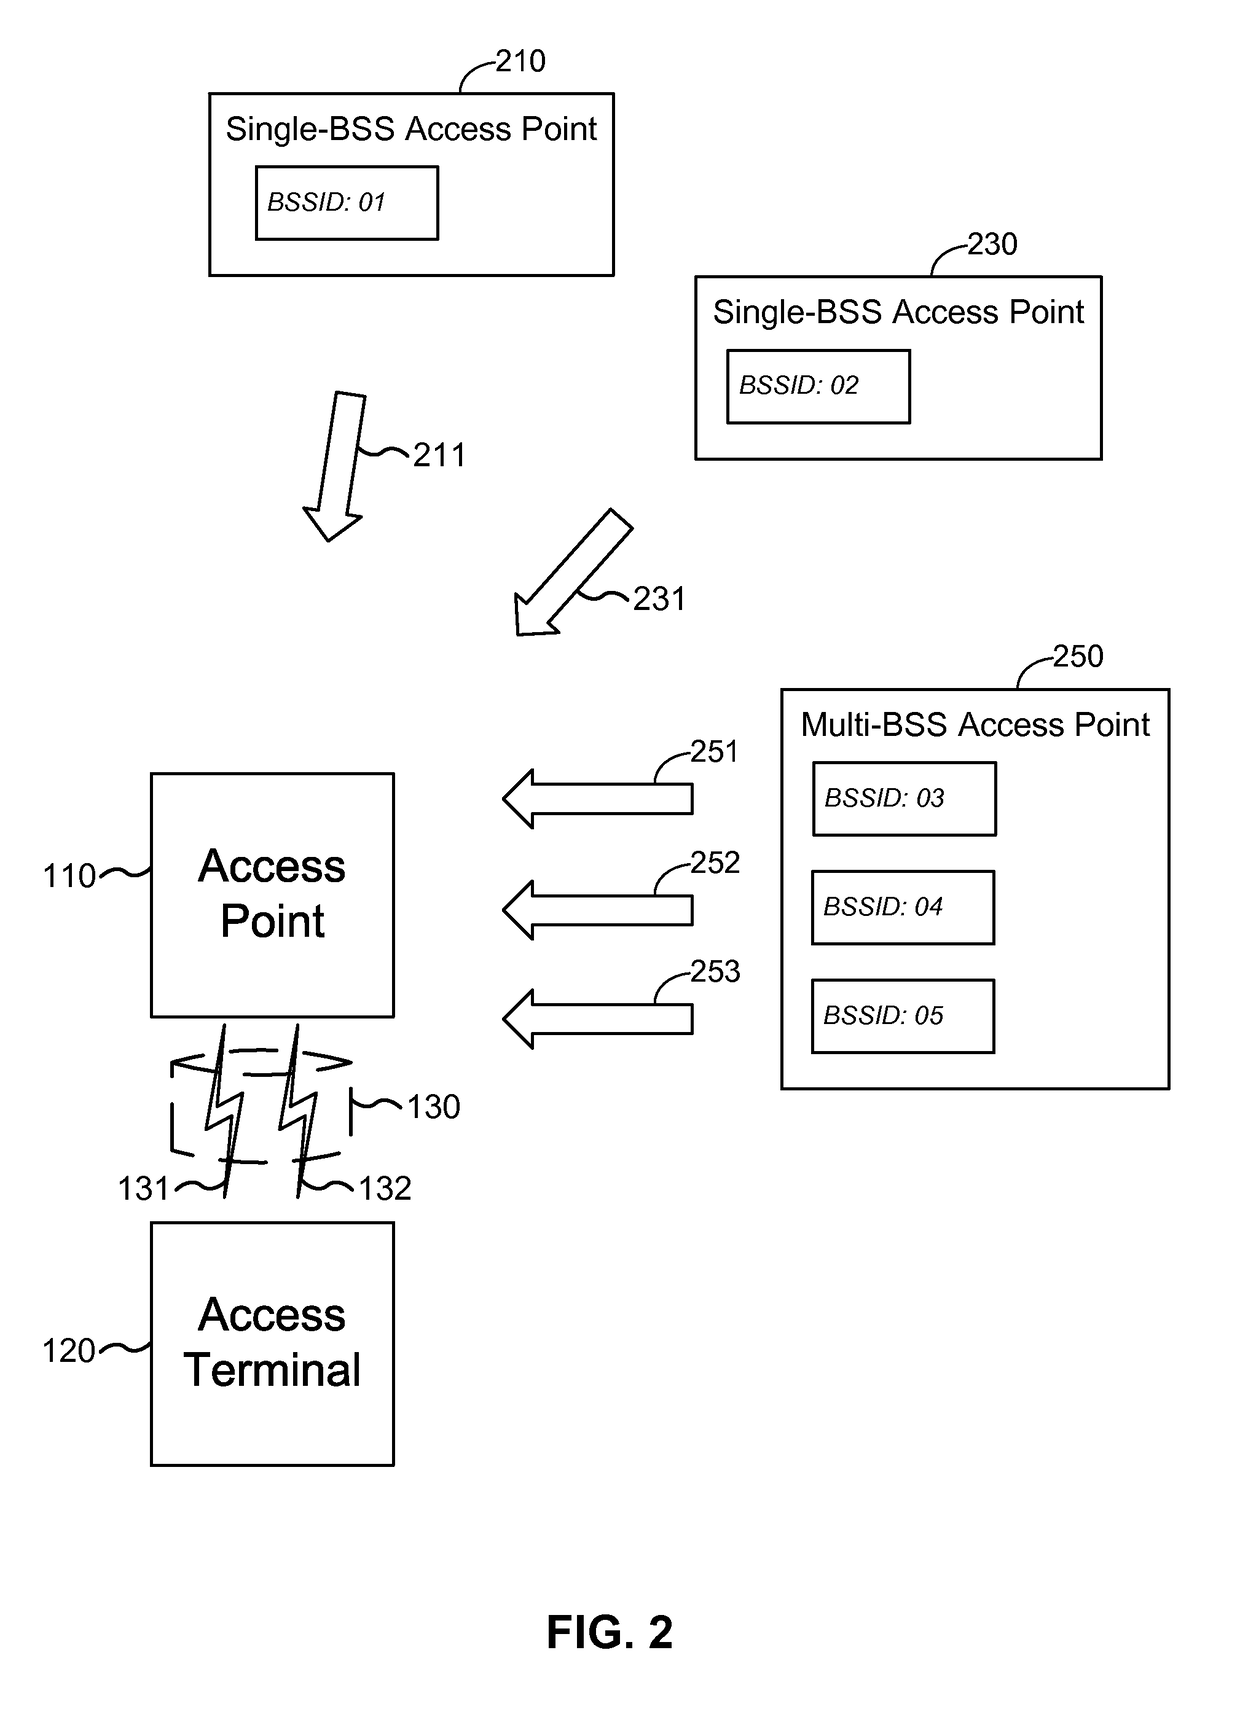 Setting transmission parameters in a shared communication medium